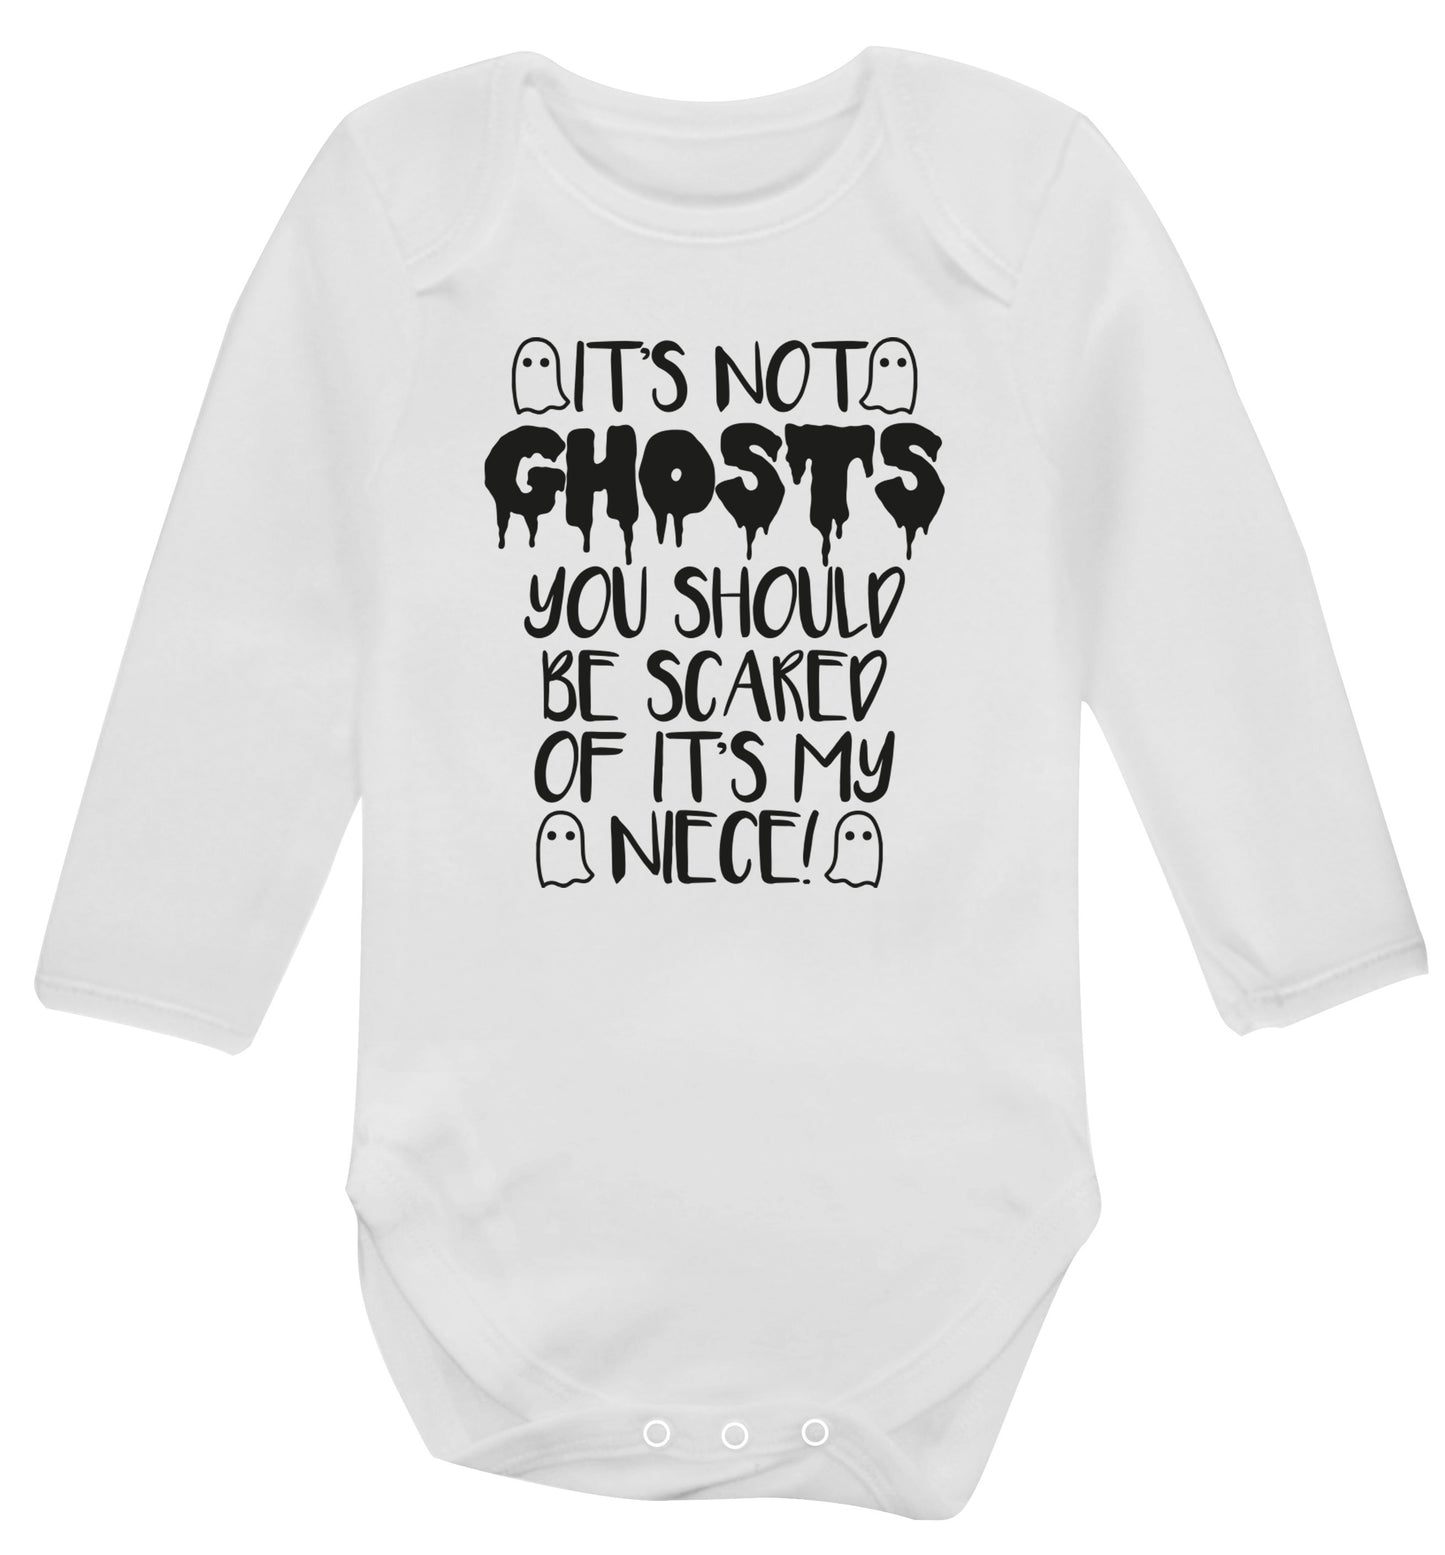 It's not ghosts you should be scared of it's my niece! Baby Vest long sleeved white 6-12 months